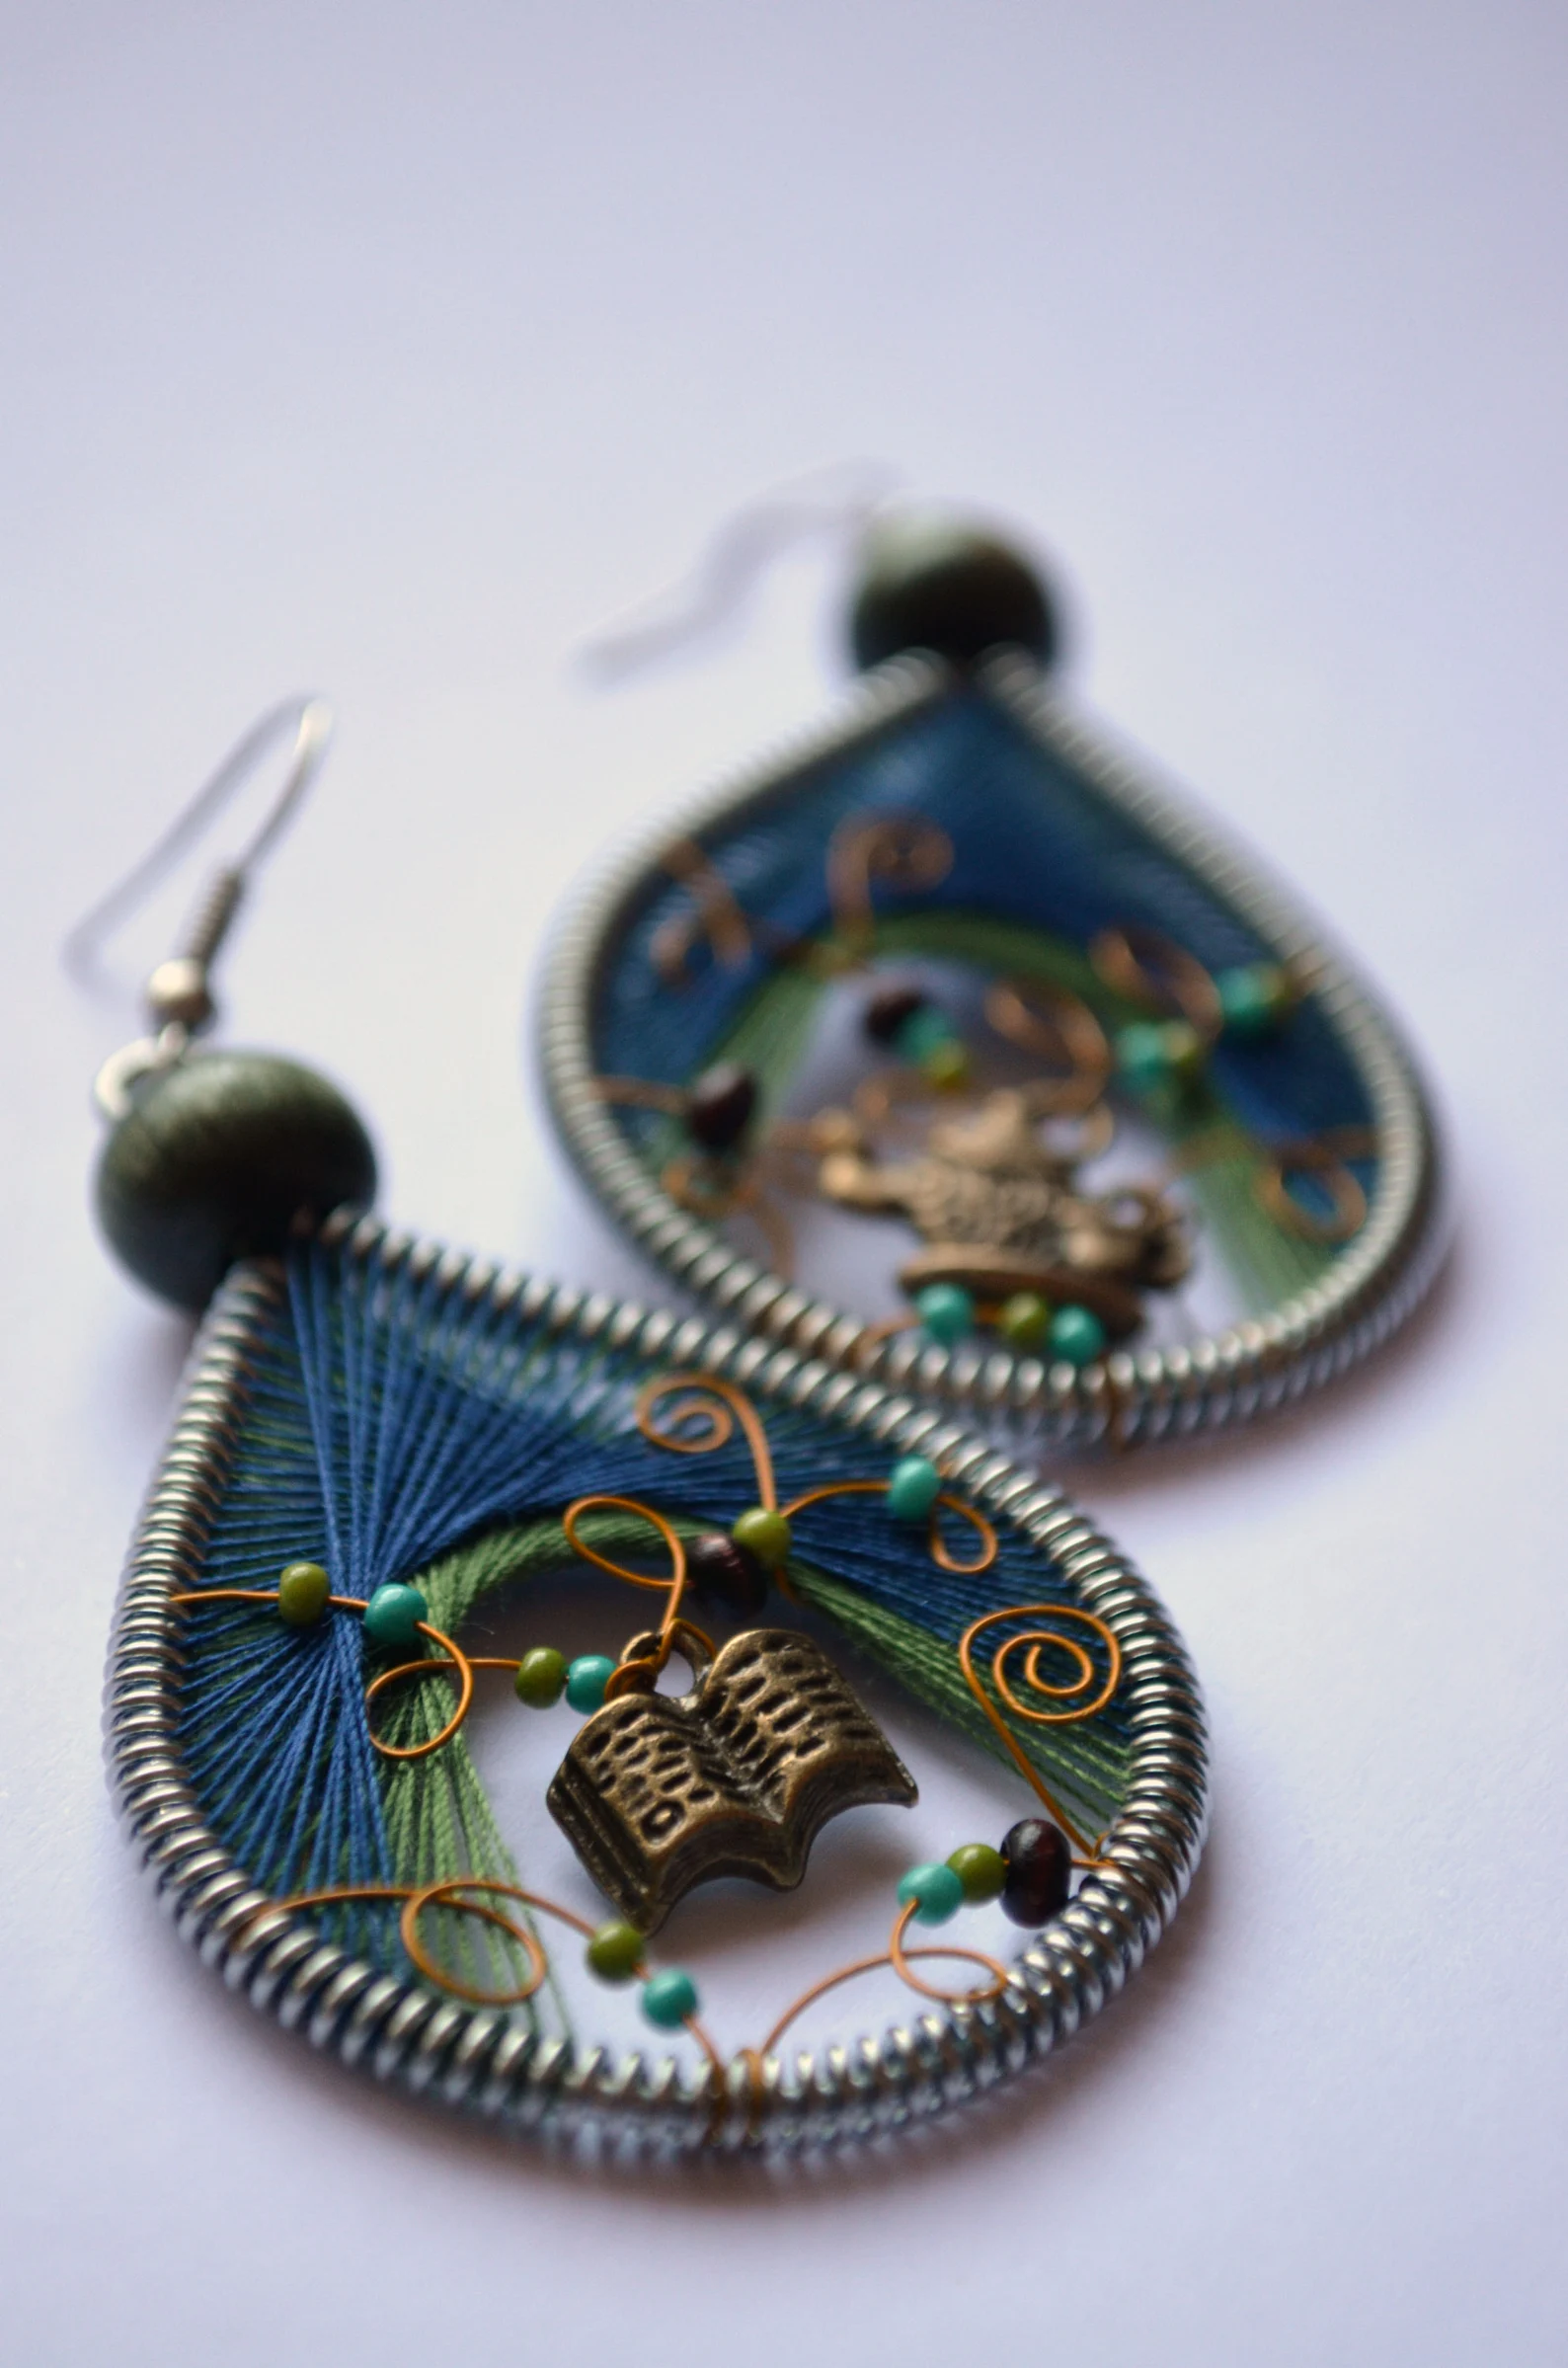 Chandelier earrings with embroidery three and book charms